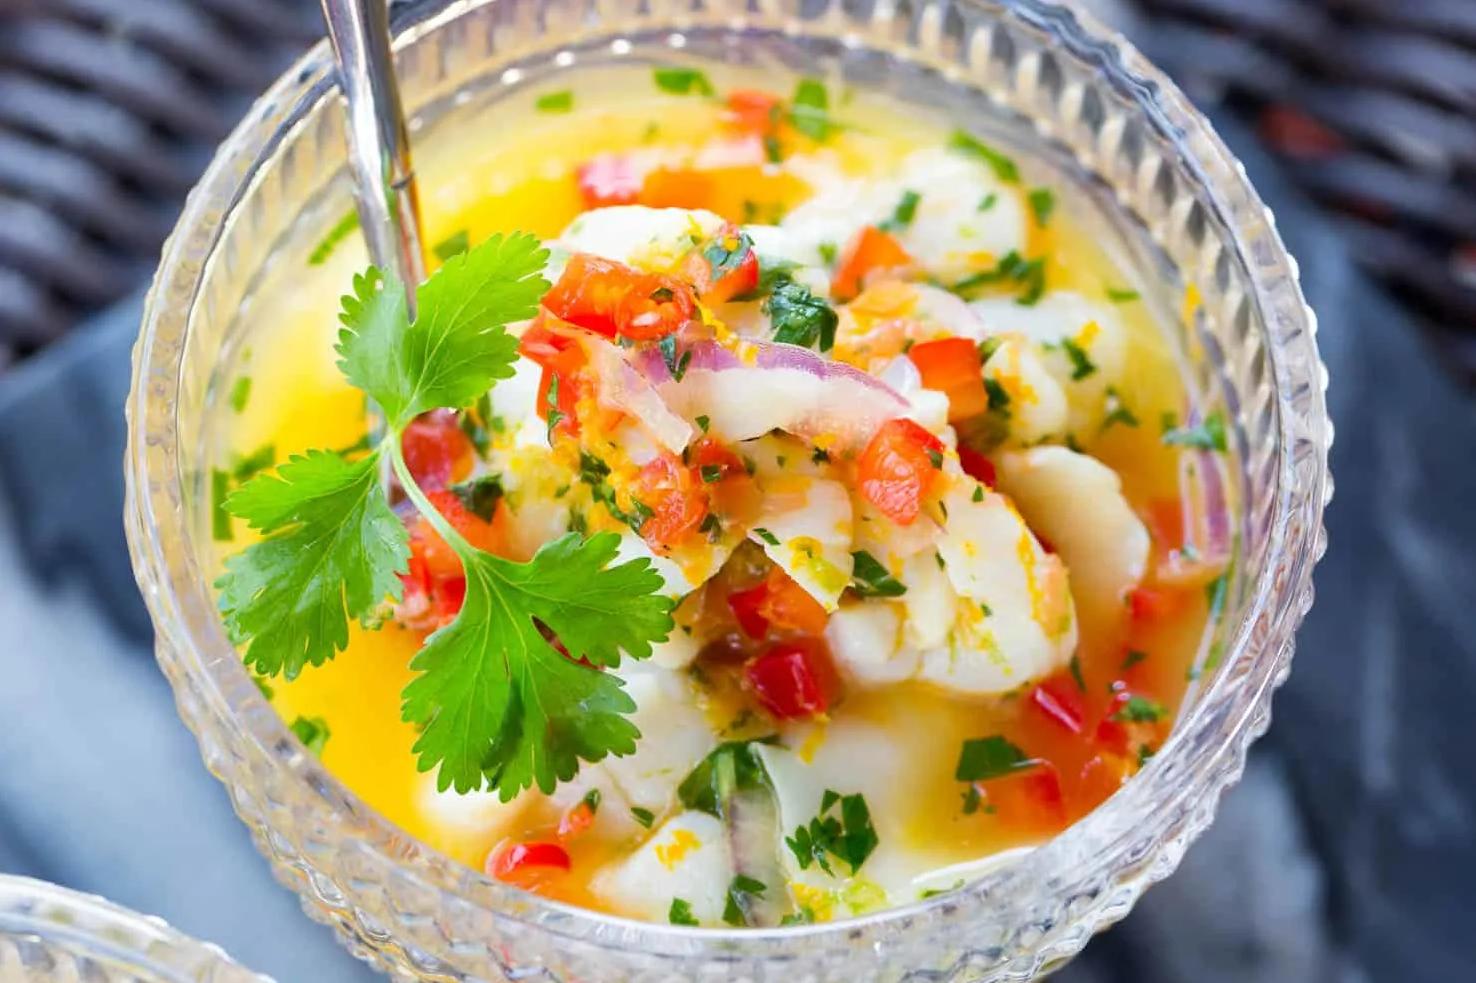  Refreshing seafood dish that's perfect for summer.